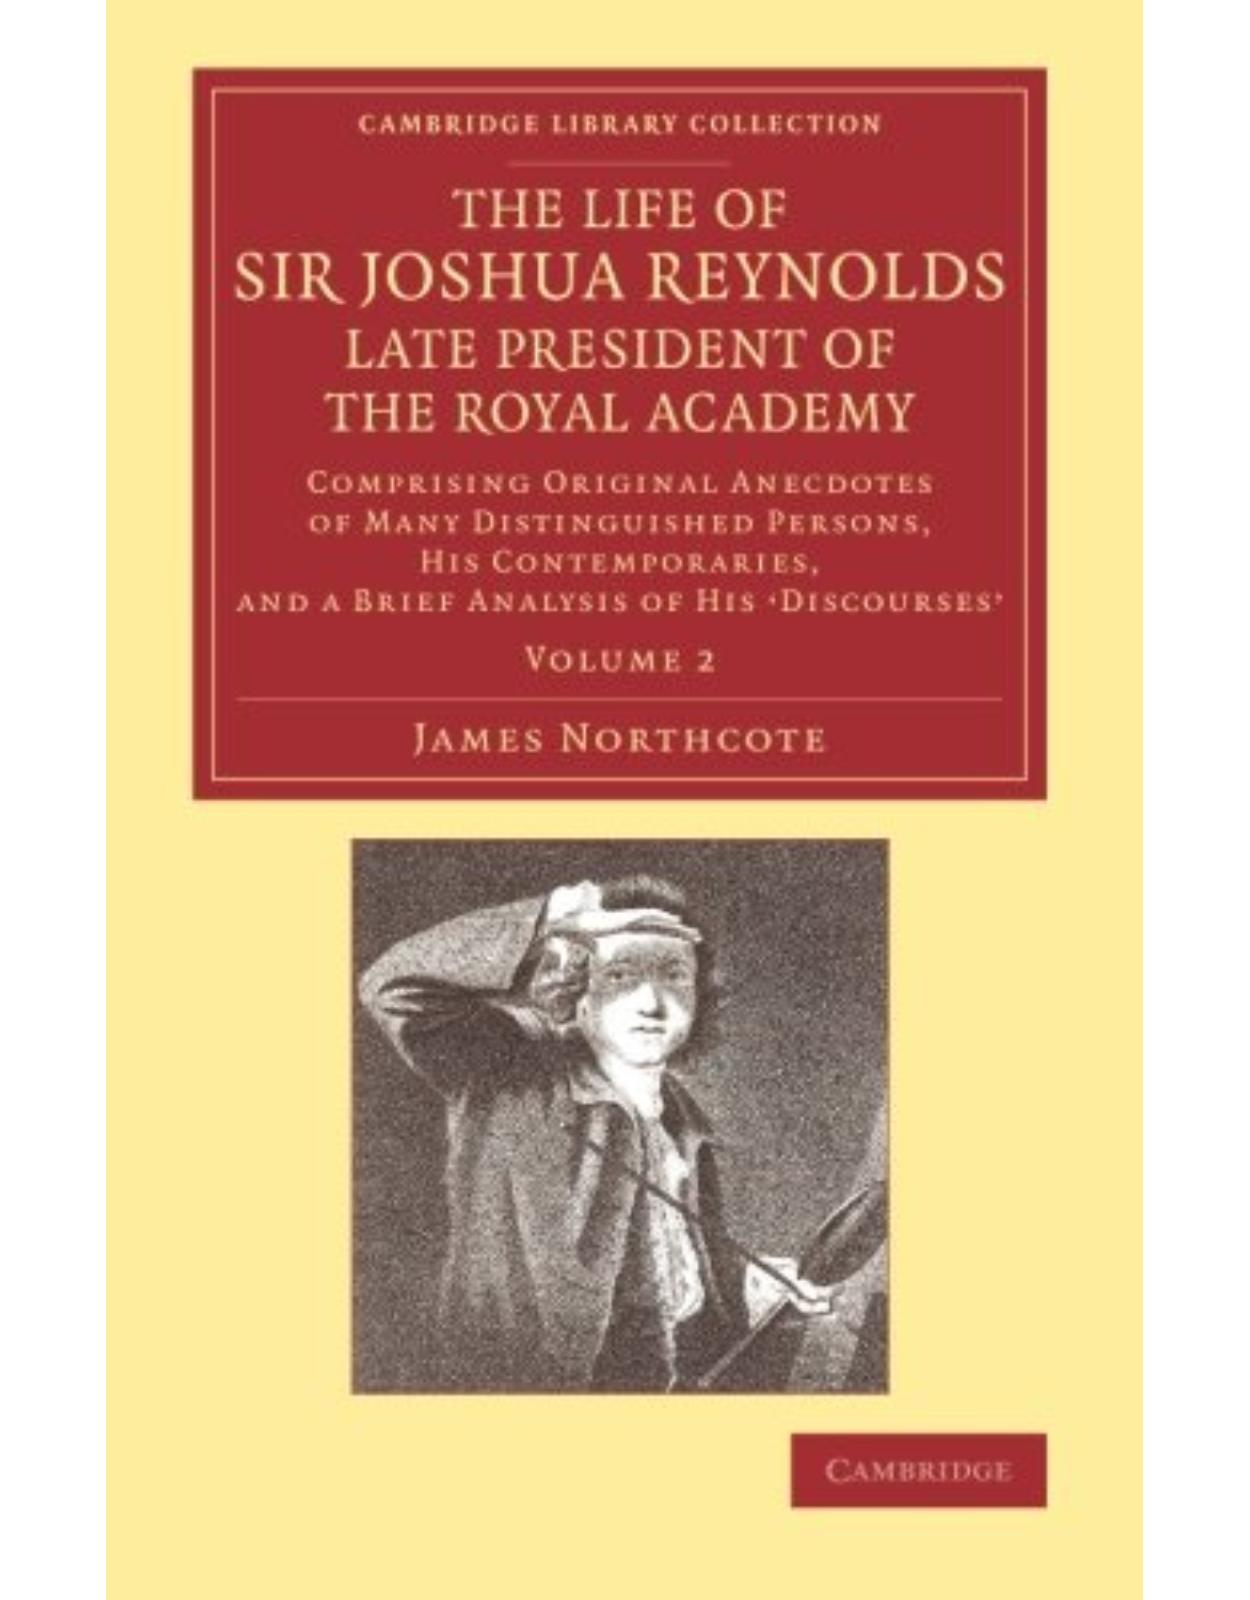 The Life of Sir Joshua Reynolds, Ll.D., F.R.S., F.S.A., etc., Late President of the Royal Academy: Volume 2: Comprising Original Anecdotes of Many Distinguished Persons, his Contemporaries, and a Brief Analysis of his  Discourses 